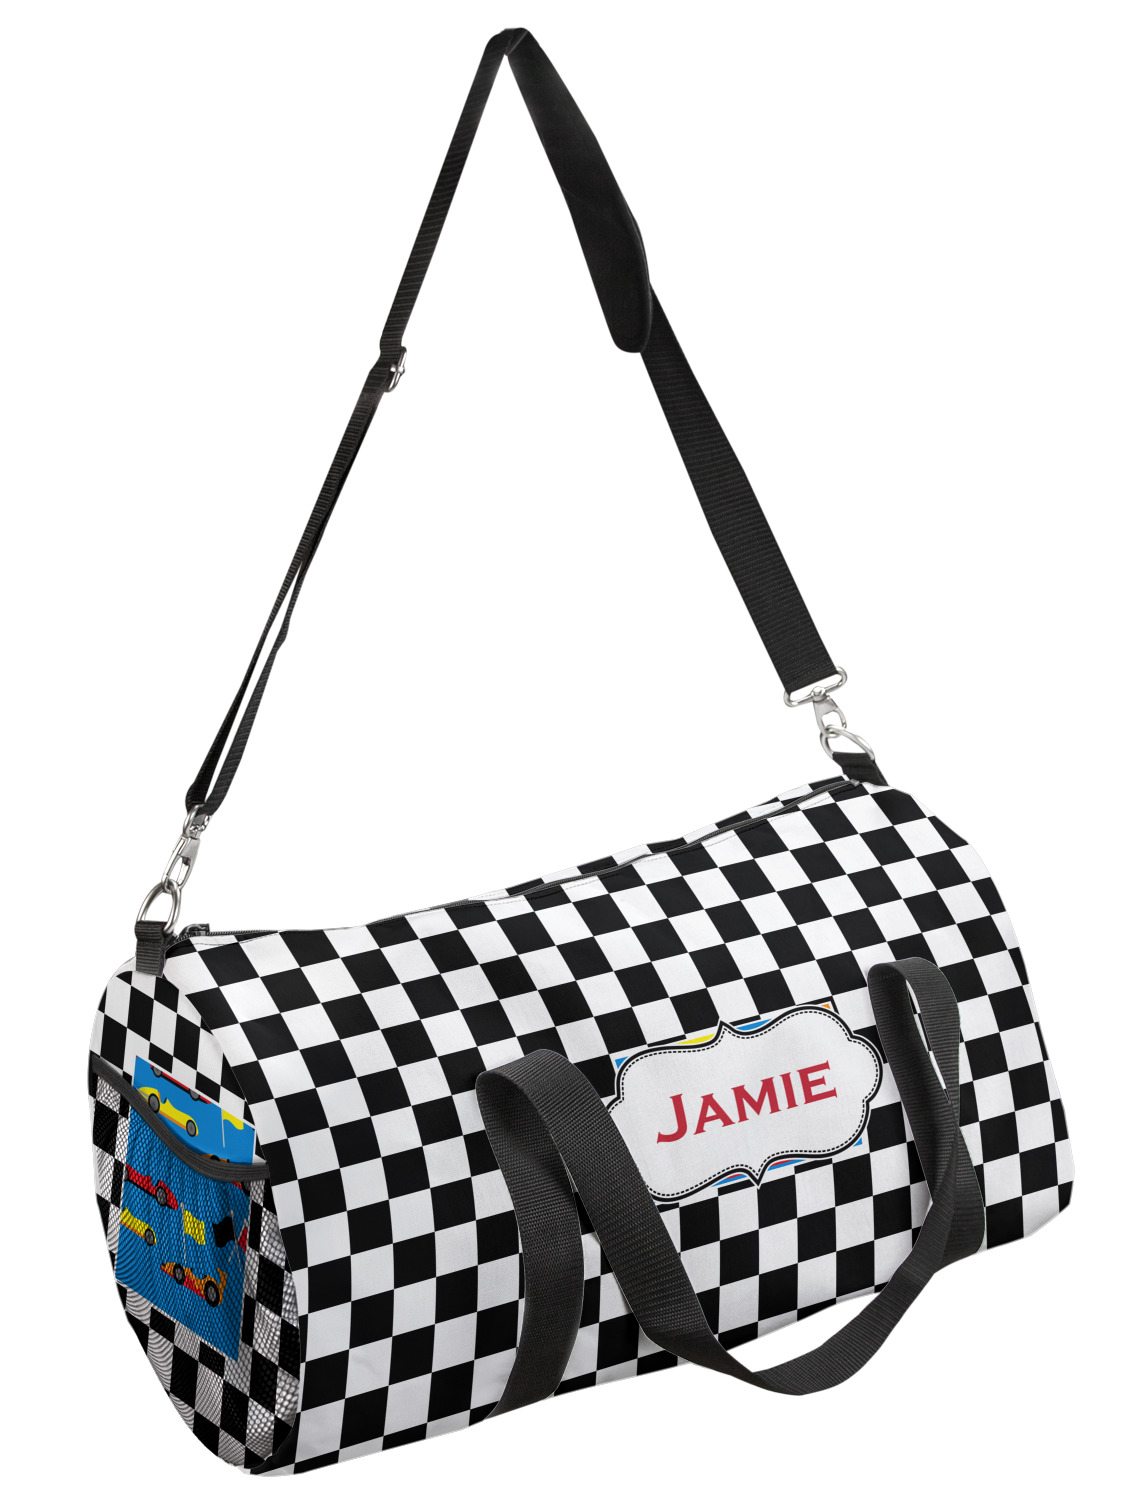 YouCustomizeIt Checkers & Racecars Duffel Bag Personalized 